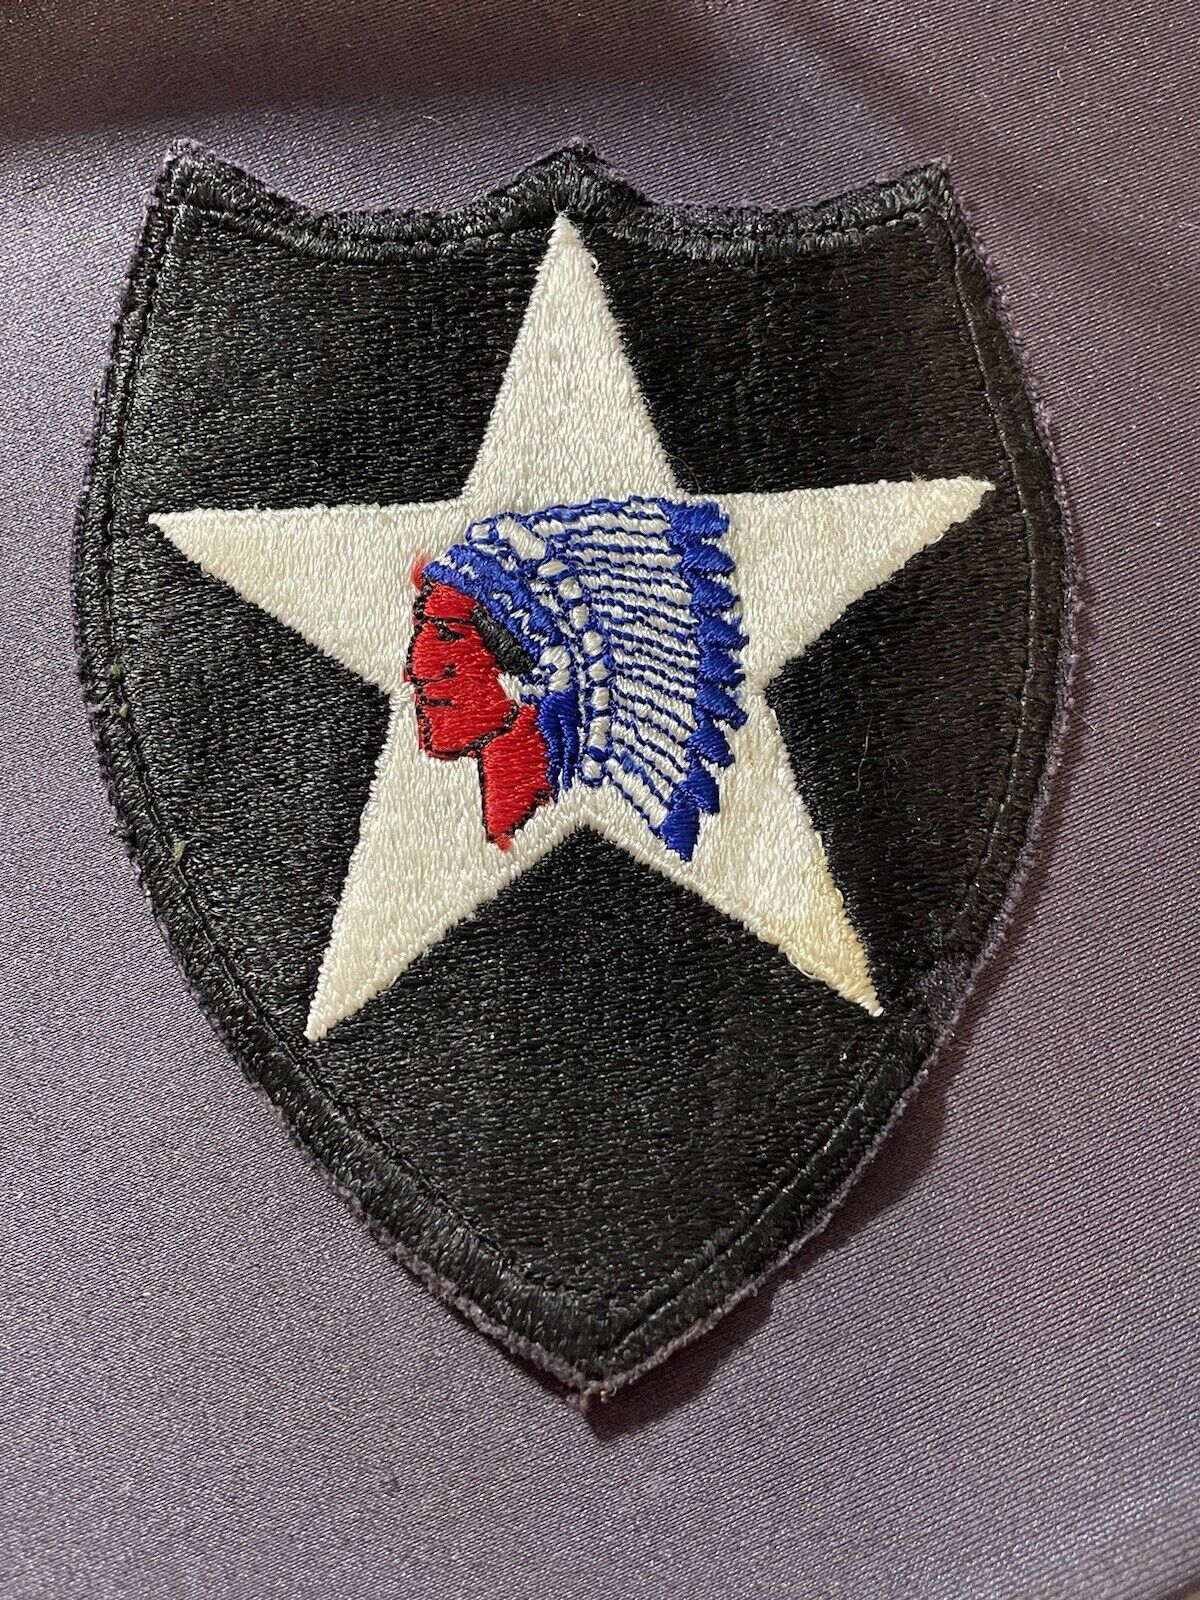 Vintage WW2 US Army 2nd Infantry Division Patch Original Cut-edge #070124-3